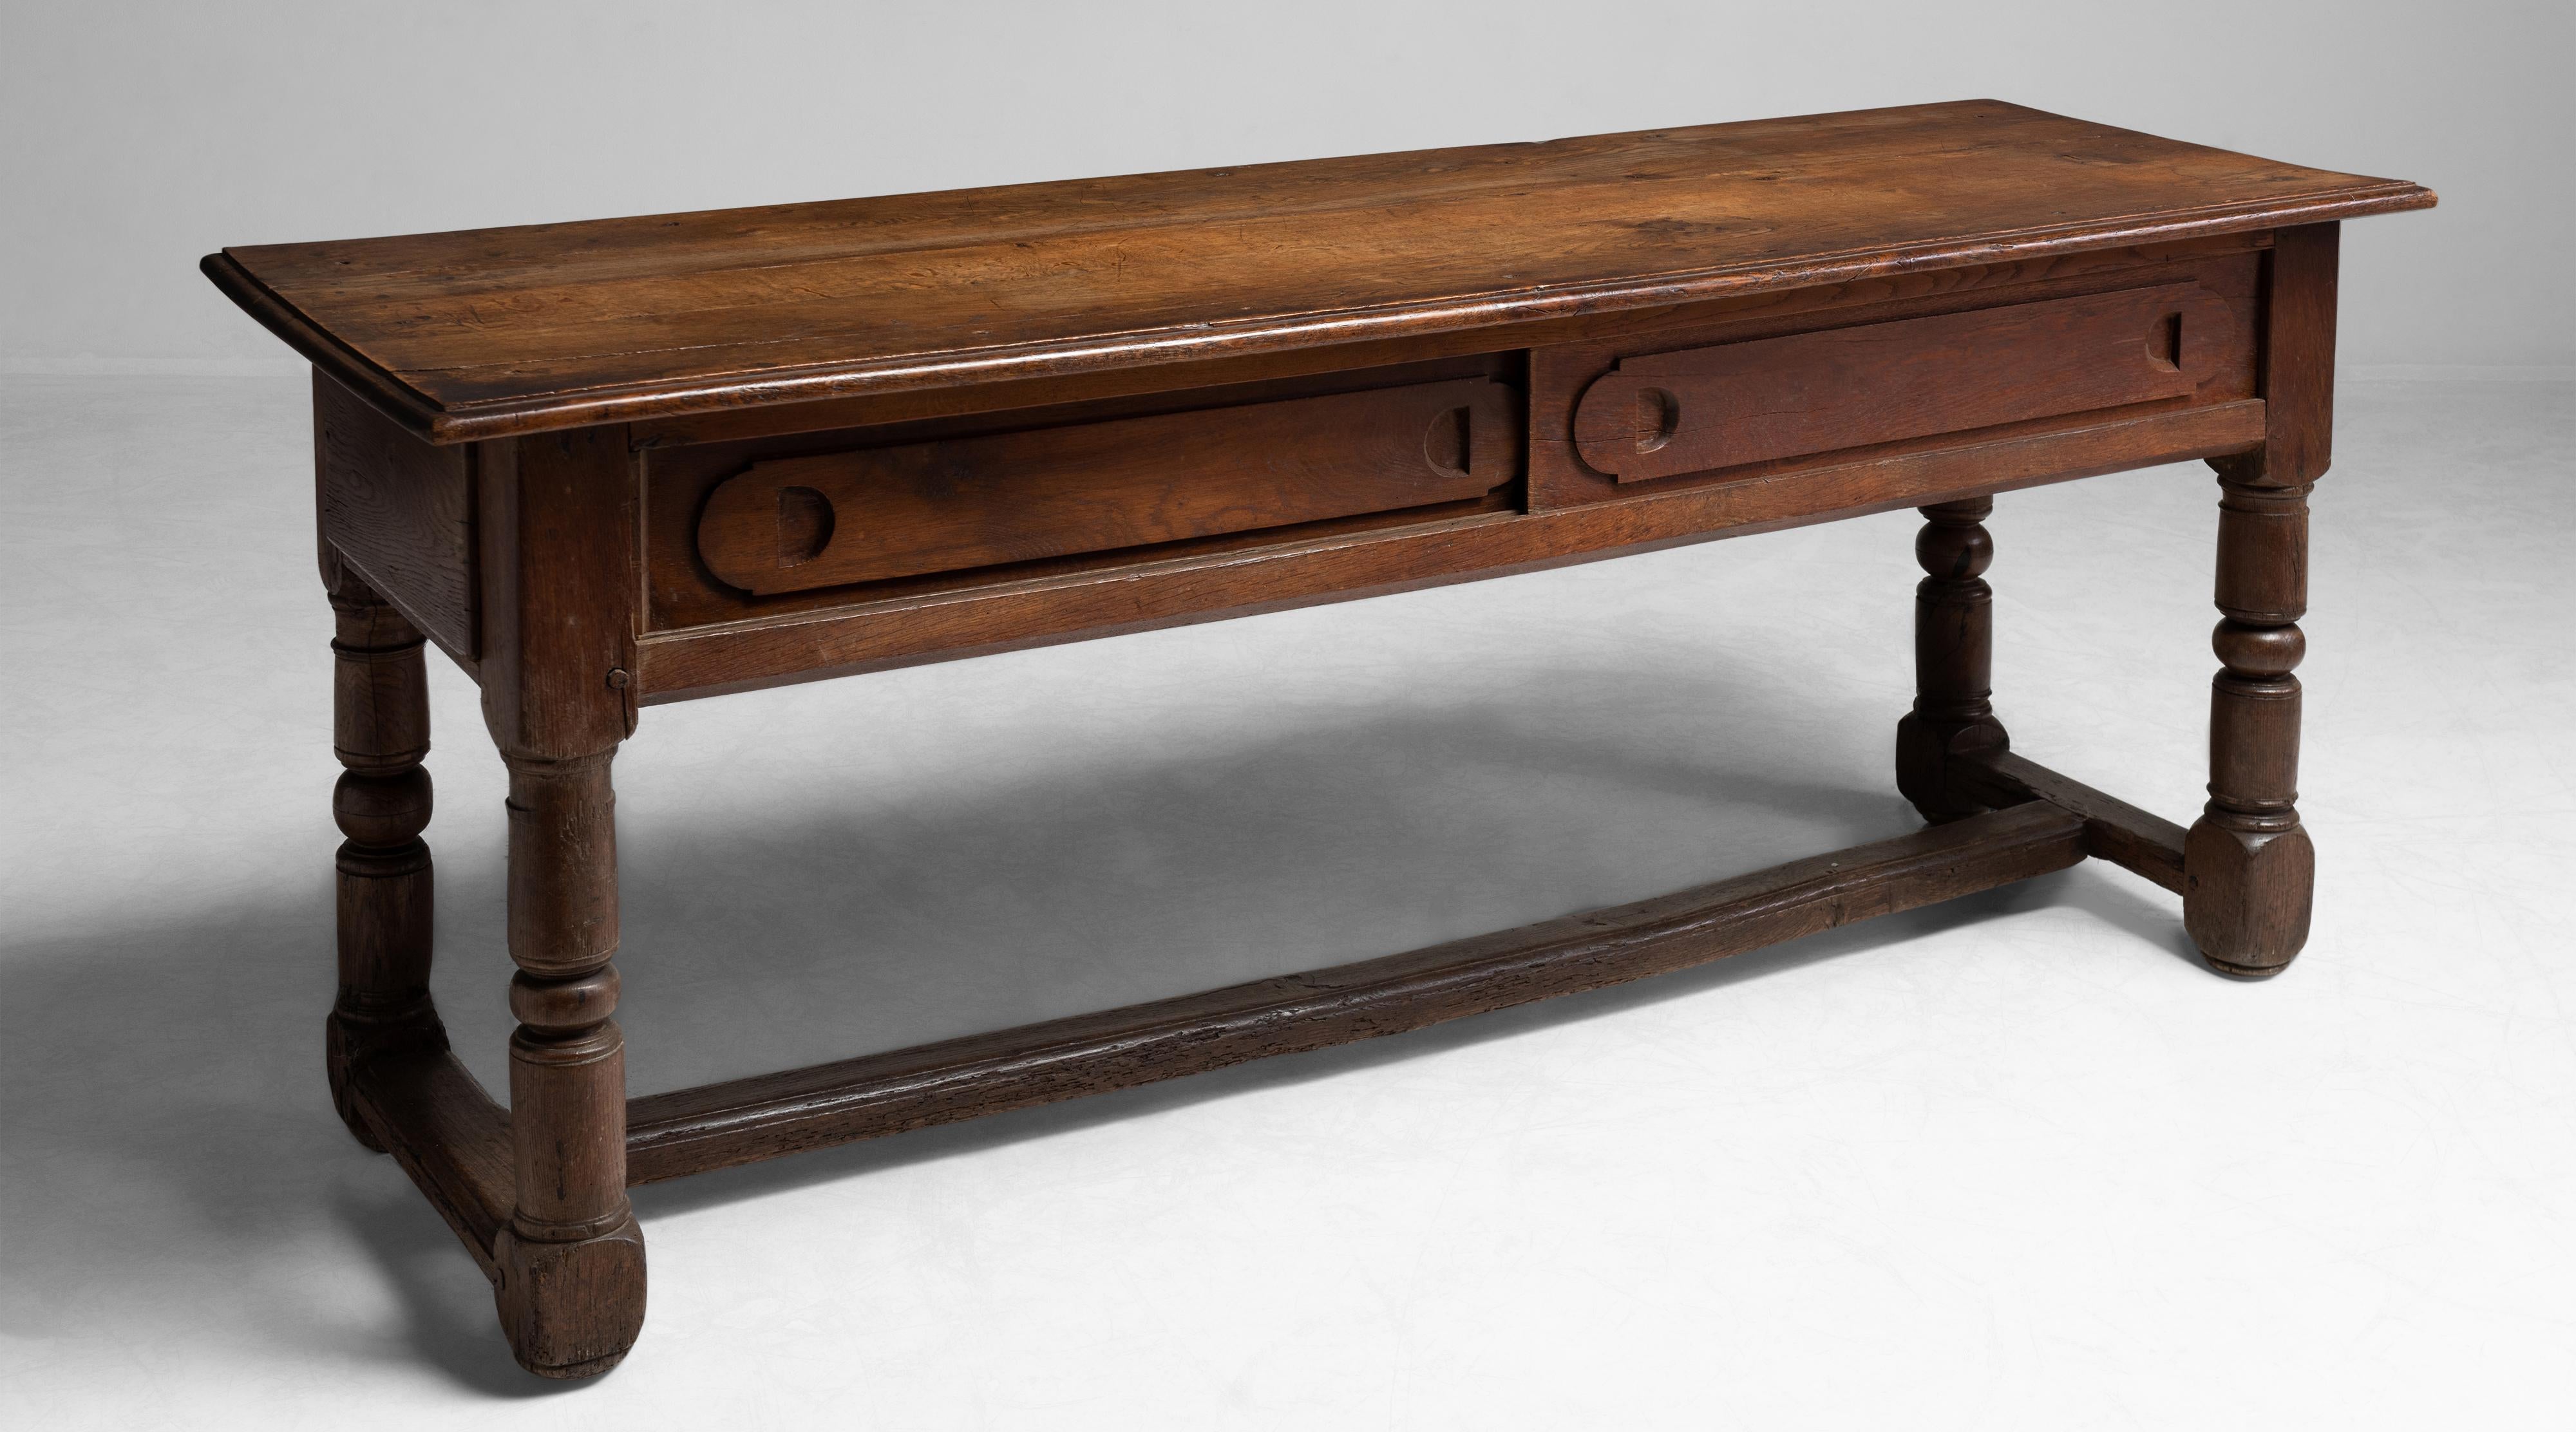 Oak console table, France, circa 1800

Unique console with two sliding doors and room for storage.

Measures: 78